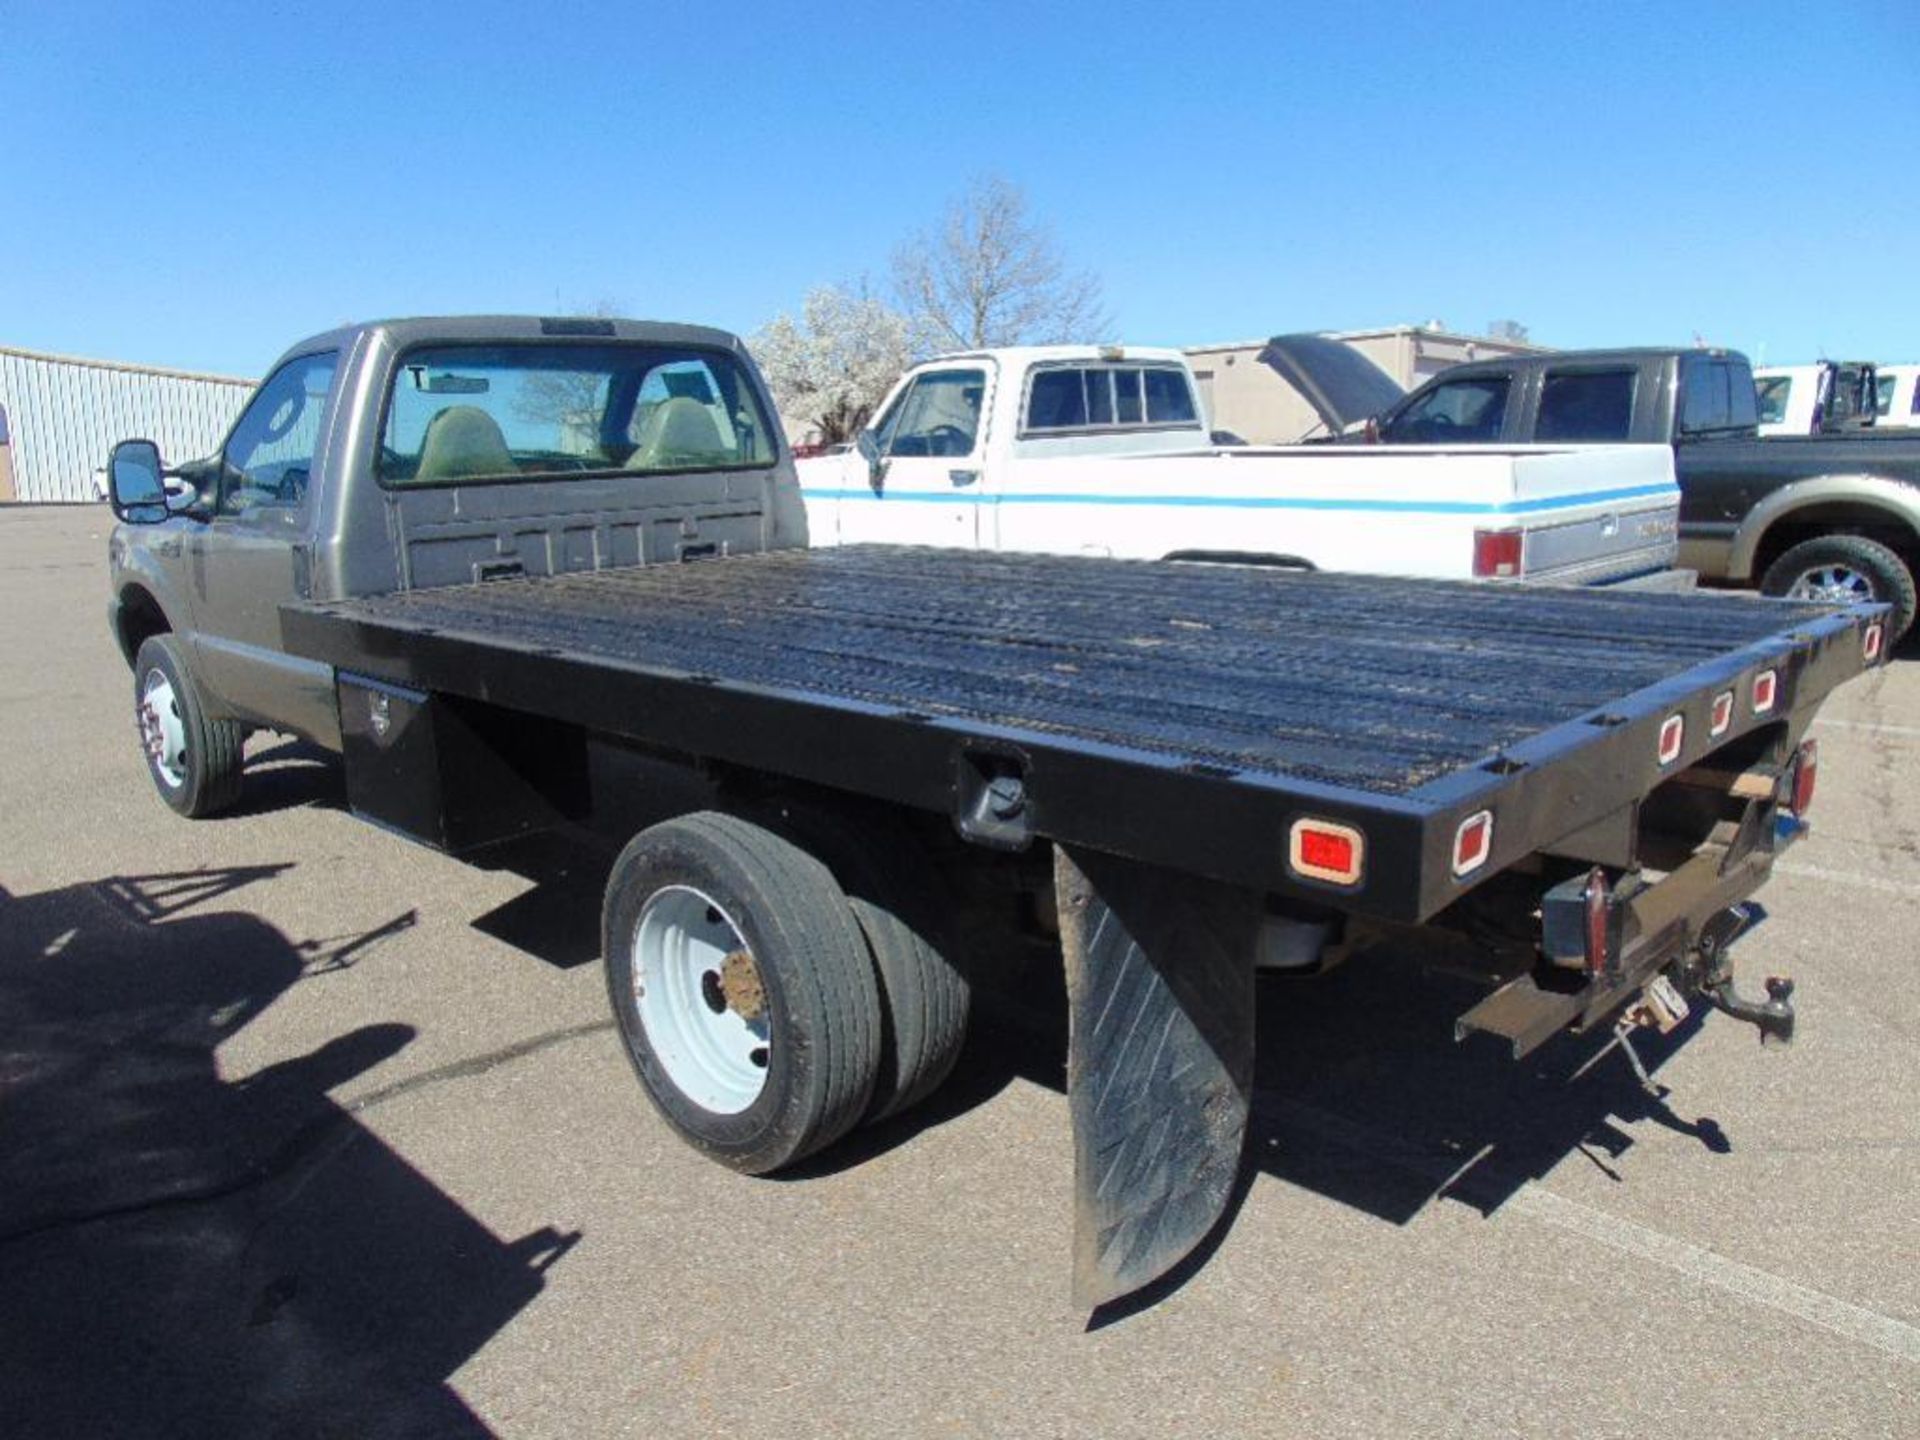 2004 Ford F450 Flatbed Truck s/n 1fdxf46s84ec92241, 6.8L eng, auto trans, 12"x8" Bed, odometer reads - Image 2 of 6